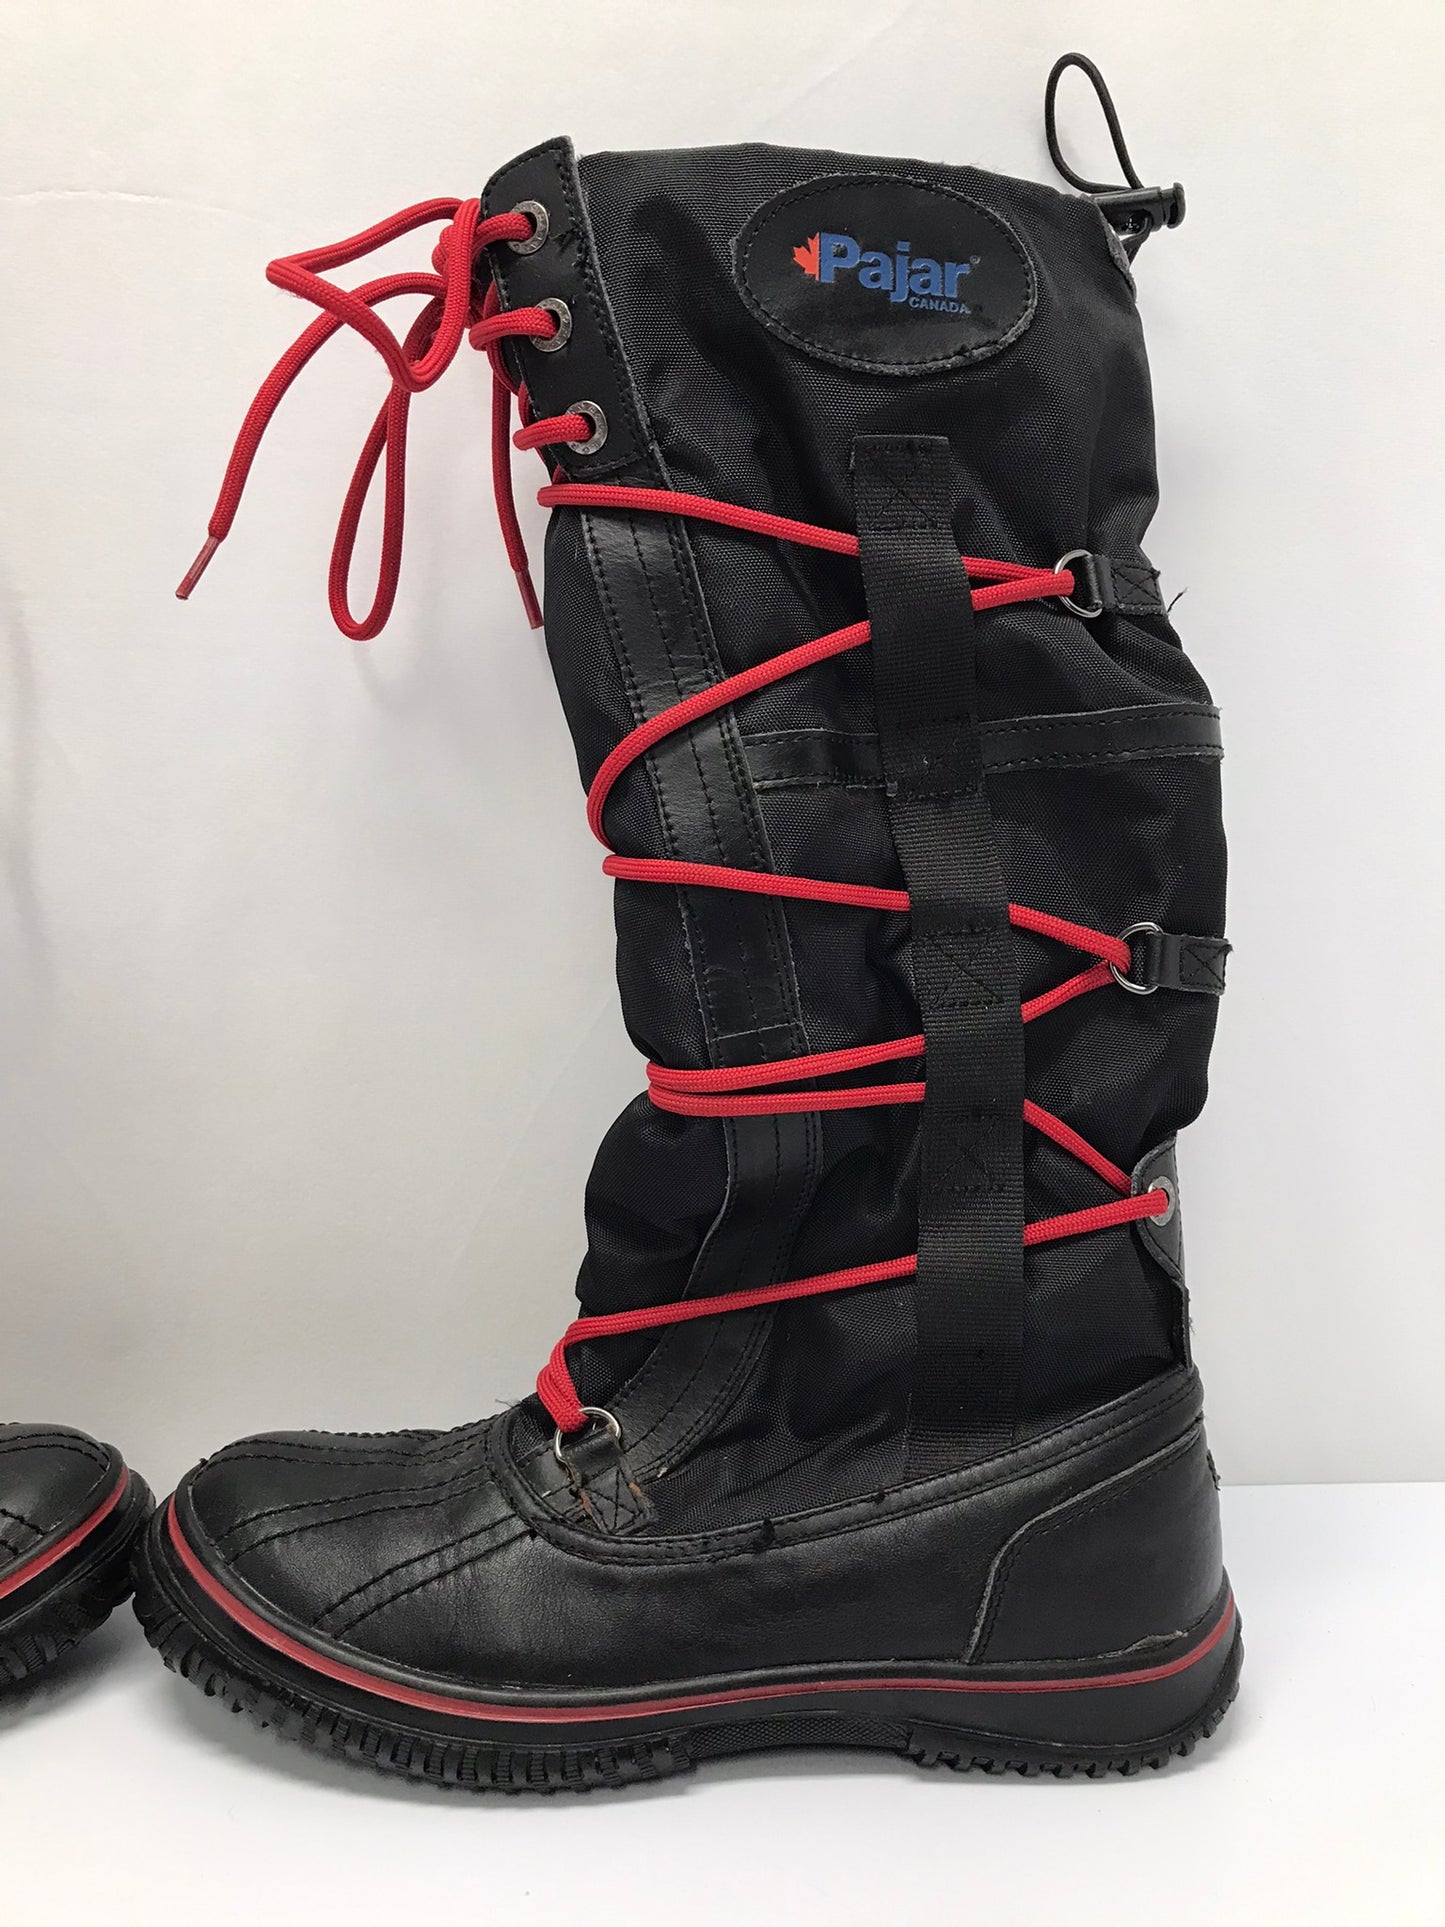 Winter Boots Ladies Size 8.5 Pajar Made In Canada Leather Black Red Excellent